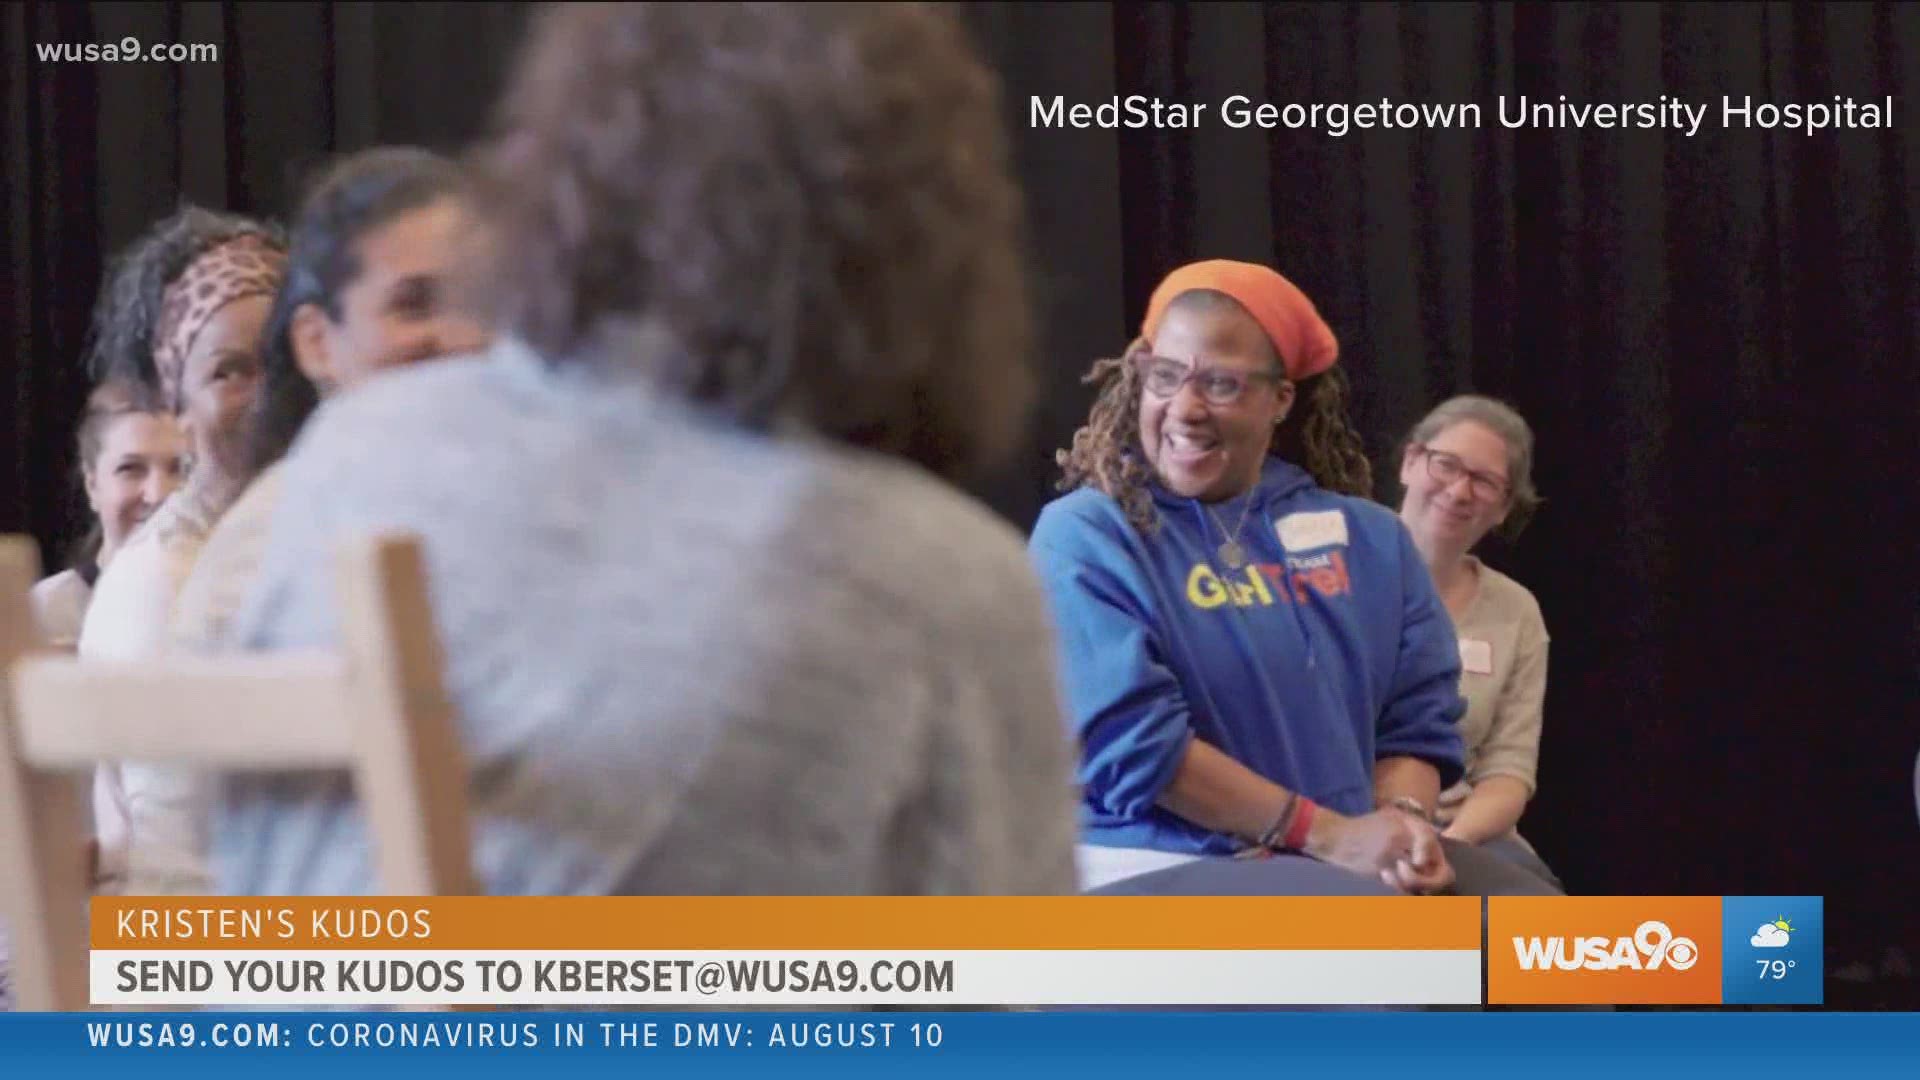 Erika Mitchell of MedStar Georgetown University Hospital helps multiple sclerosis patients through dance.